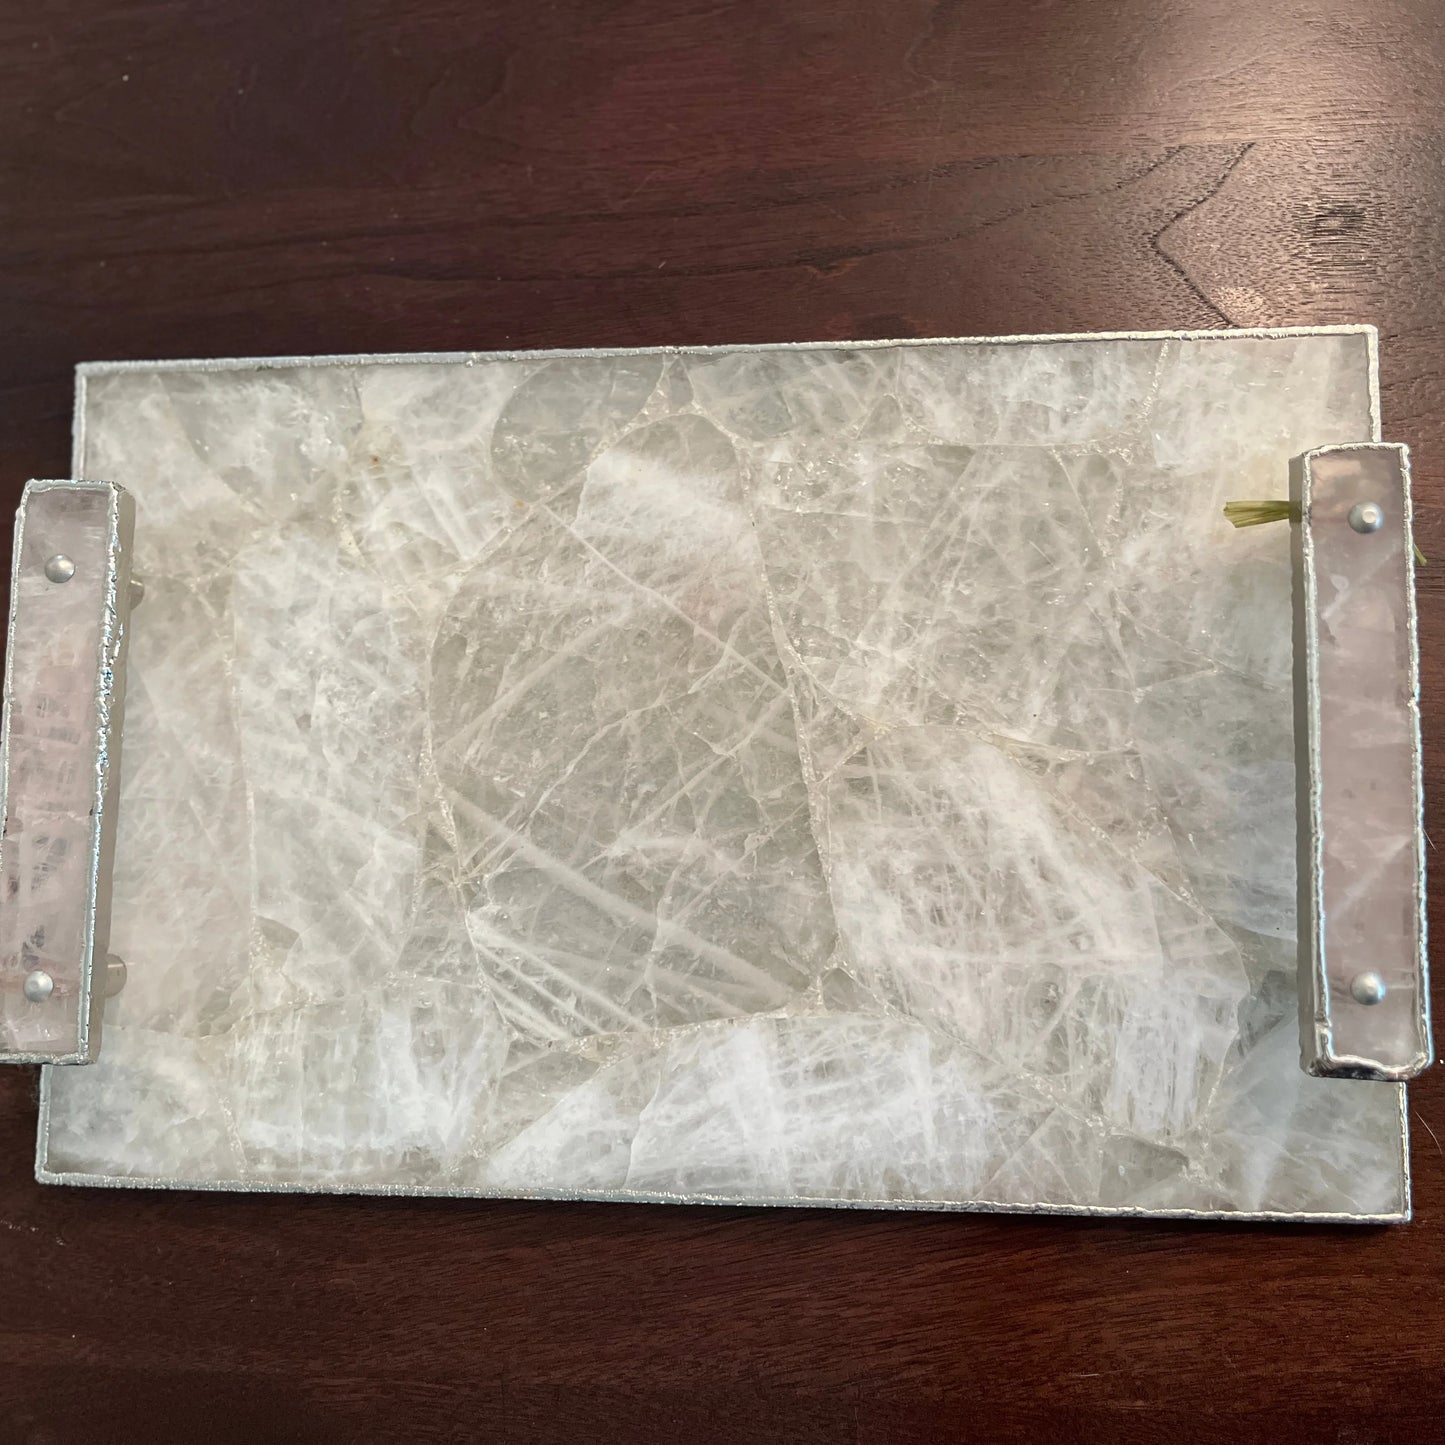 White Crystal Agate Plated Serving Tray With Rose Quartz Handles